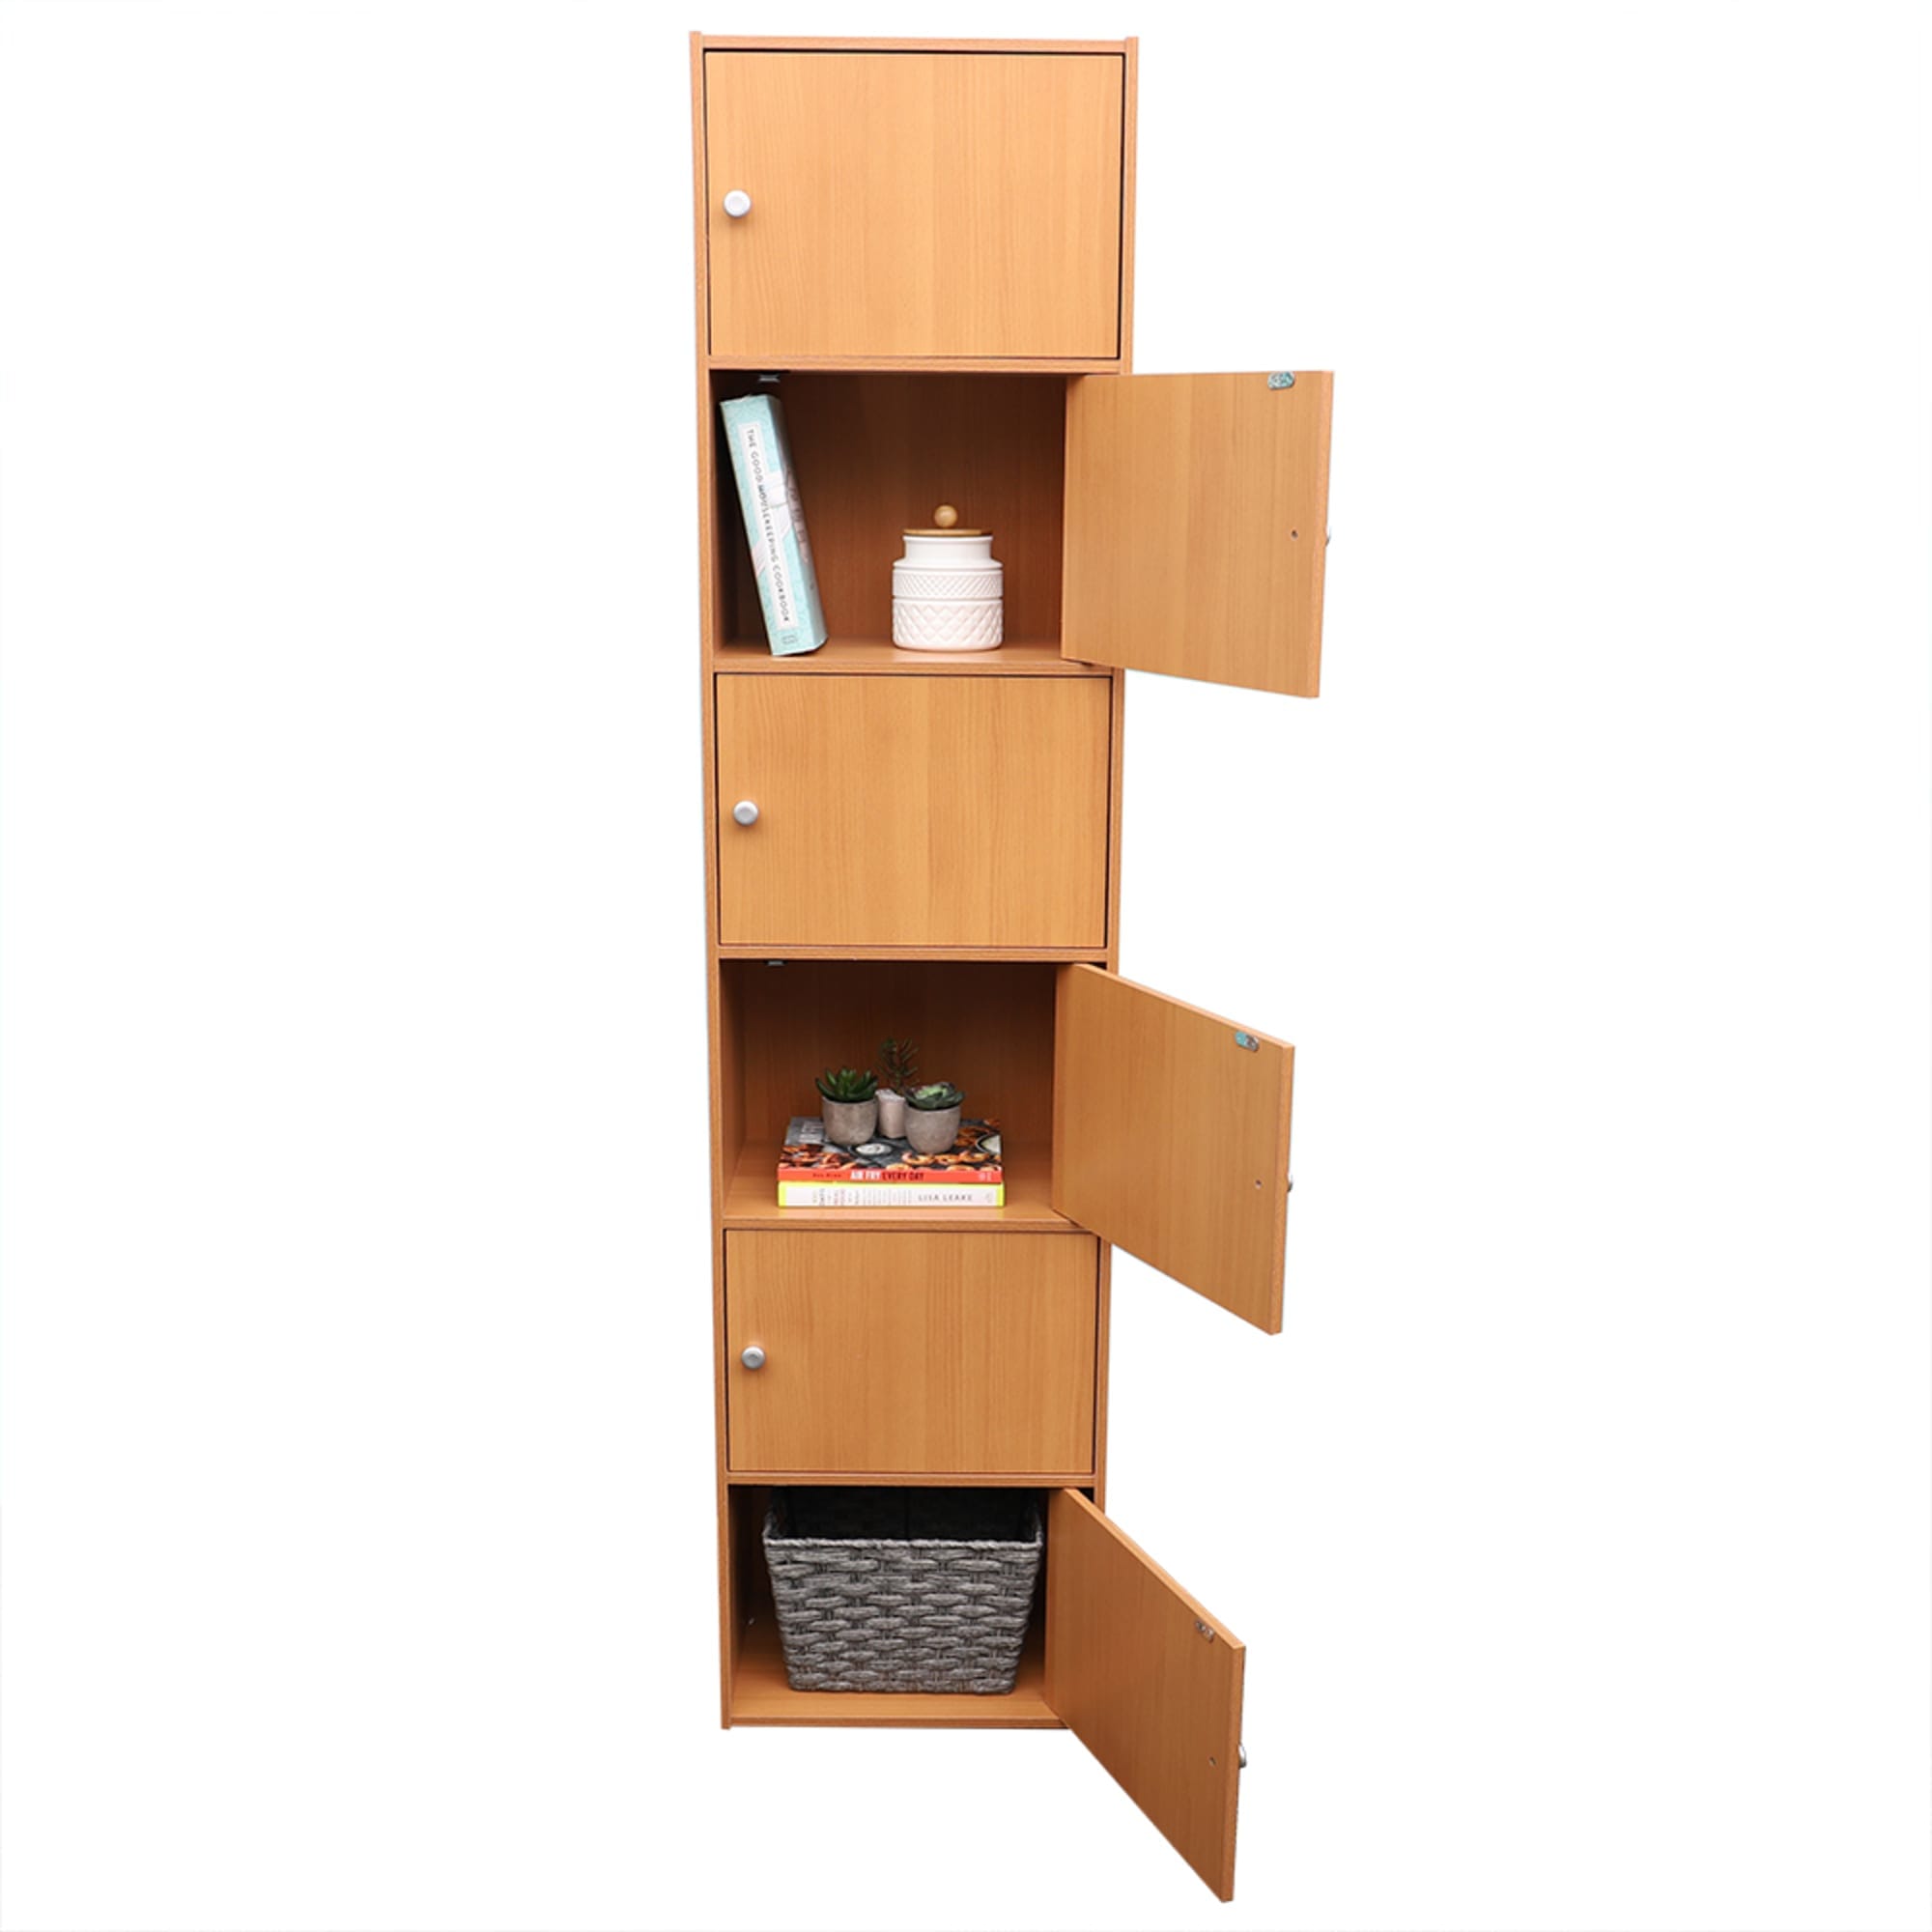 Home Basics 6 Cube  Cabinet, Natural $80.00 EACH, CASE PACK OF 1